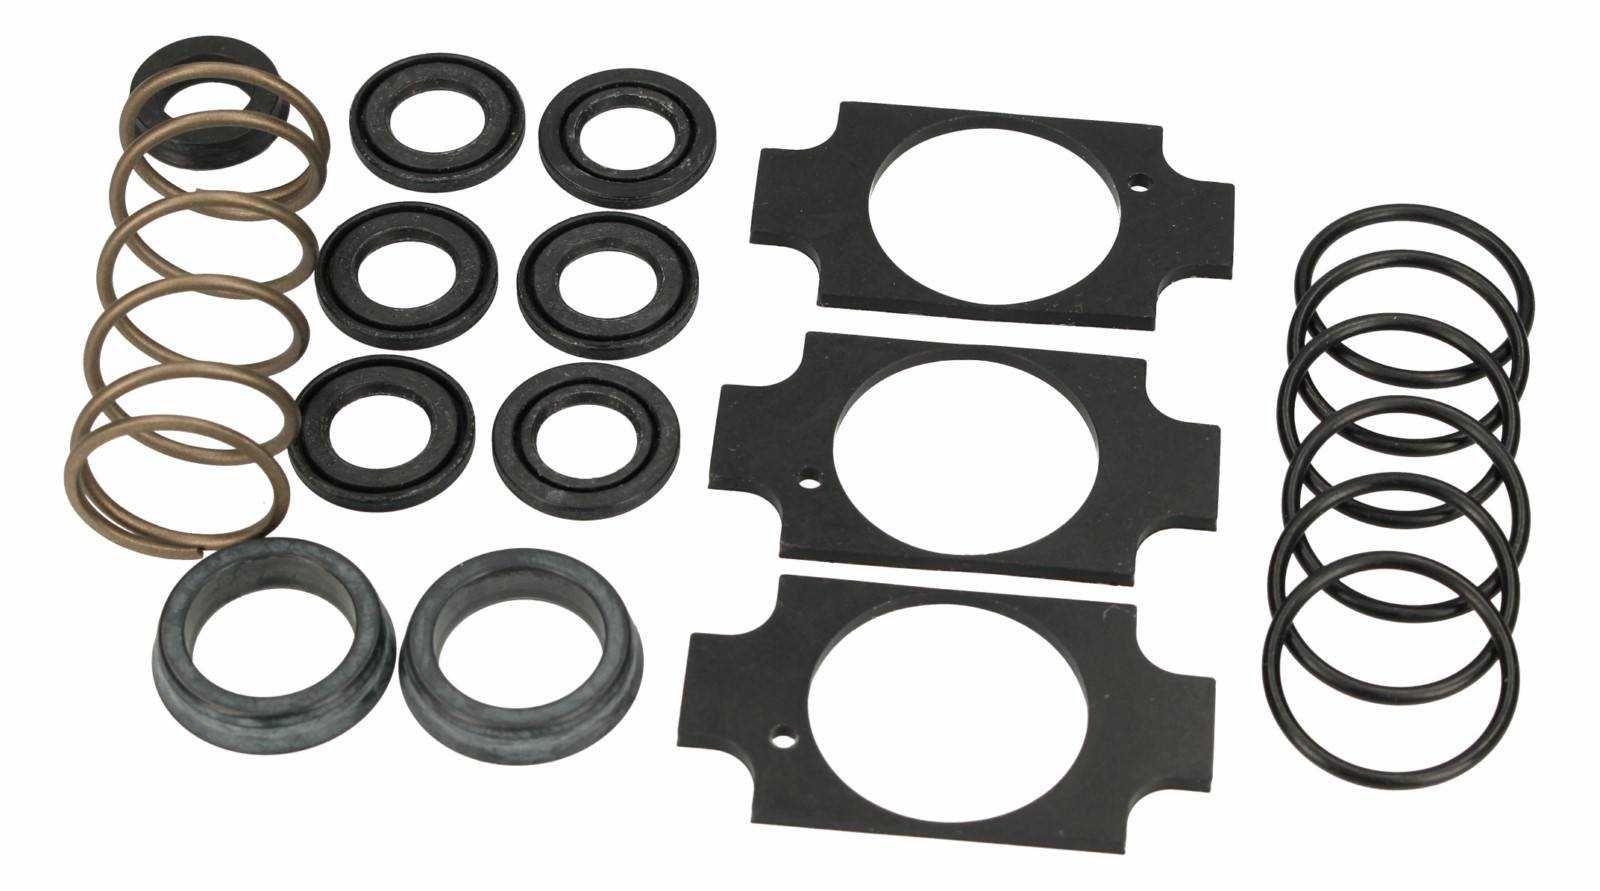 SPARE PARTS KIT 1 827 009 389 FOR PISTONS REXROTH